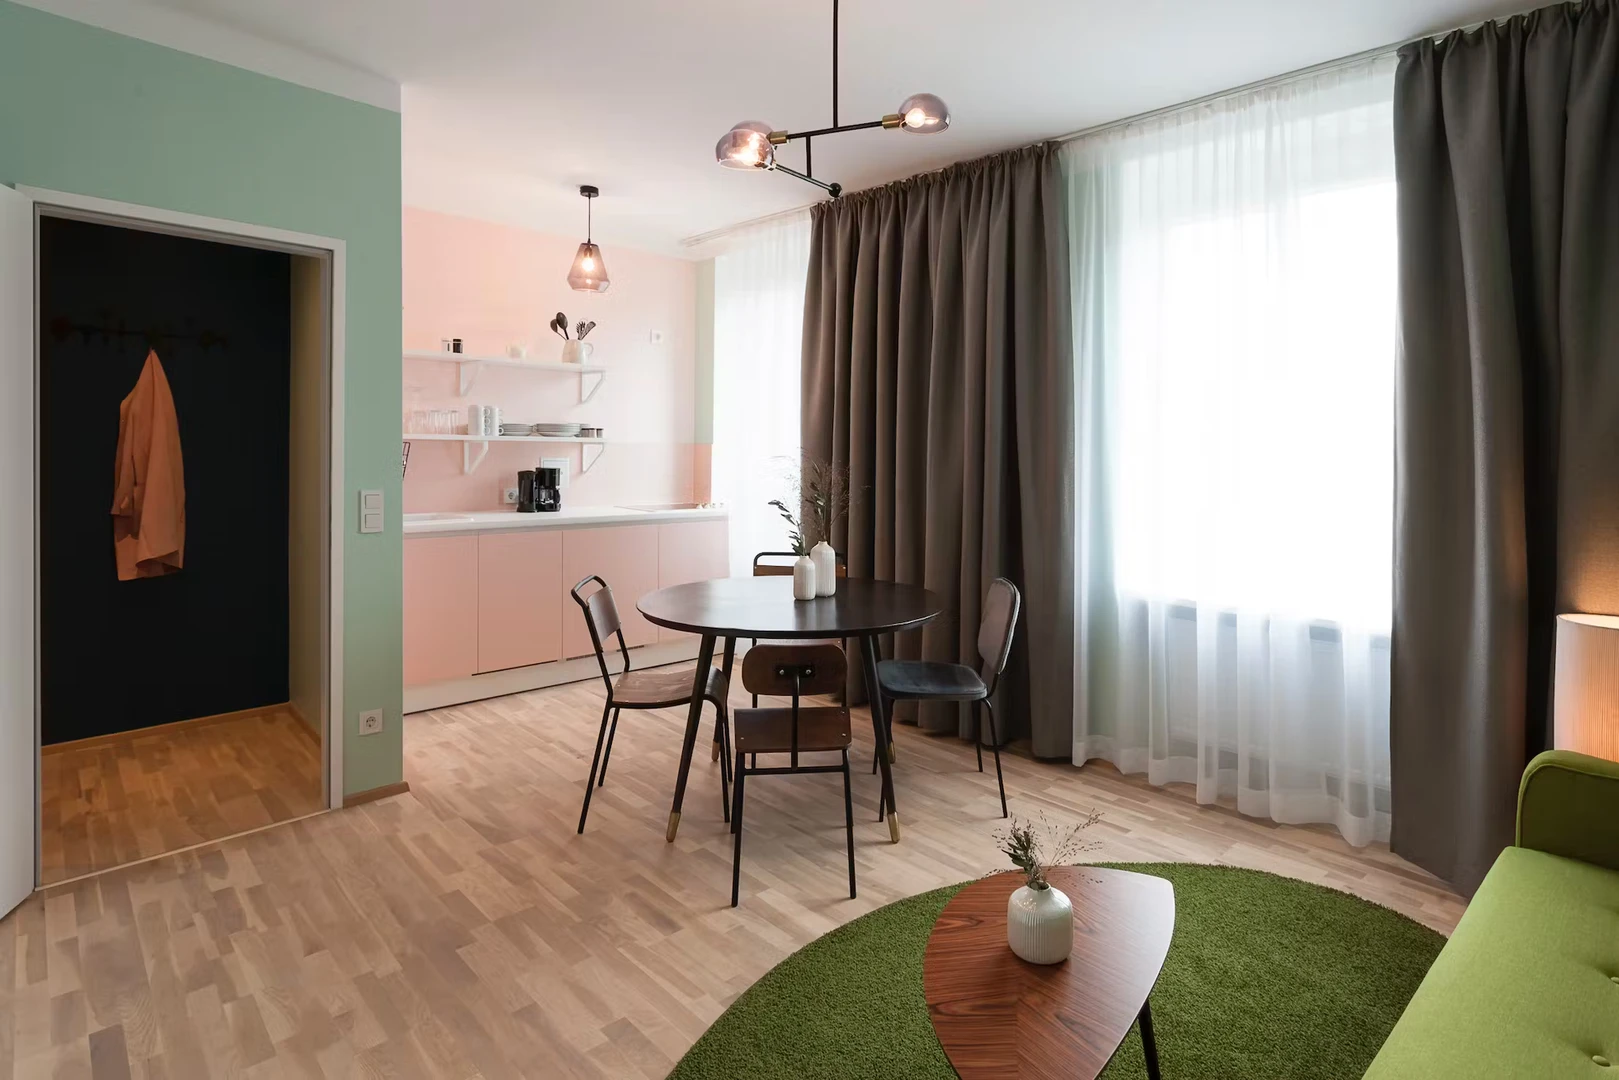 Accommodation in the centre of Linz